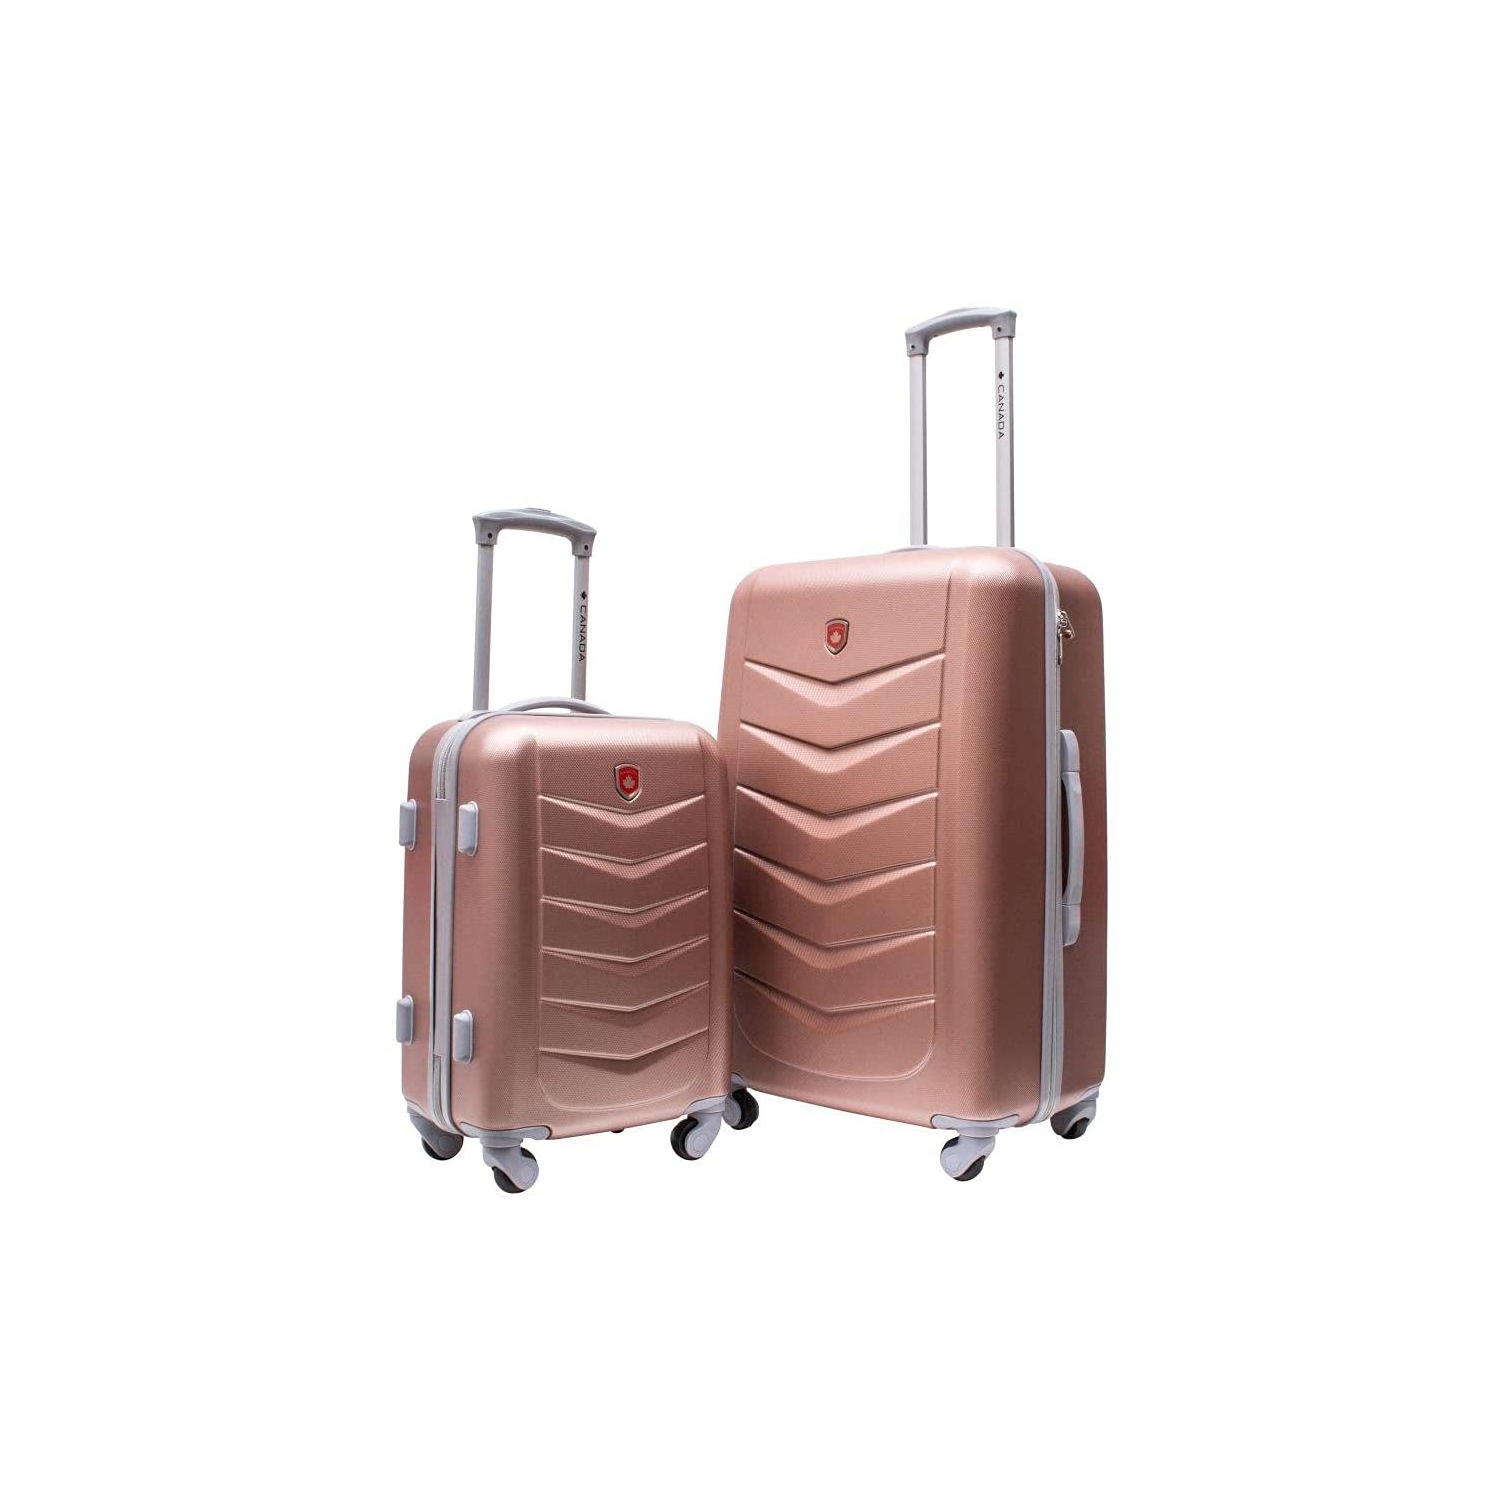 Jetstream (Canada Collection) 26 Inch and 18 Inch Hardside Carry On 2 Piece Luggage Set with Spinner Wheels - Lightweight ABS Suitcase (Rose Gold)